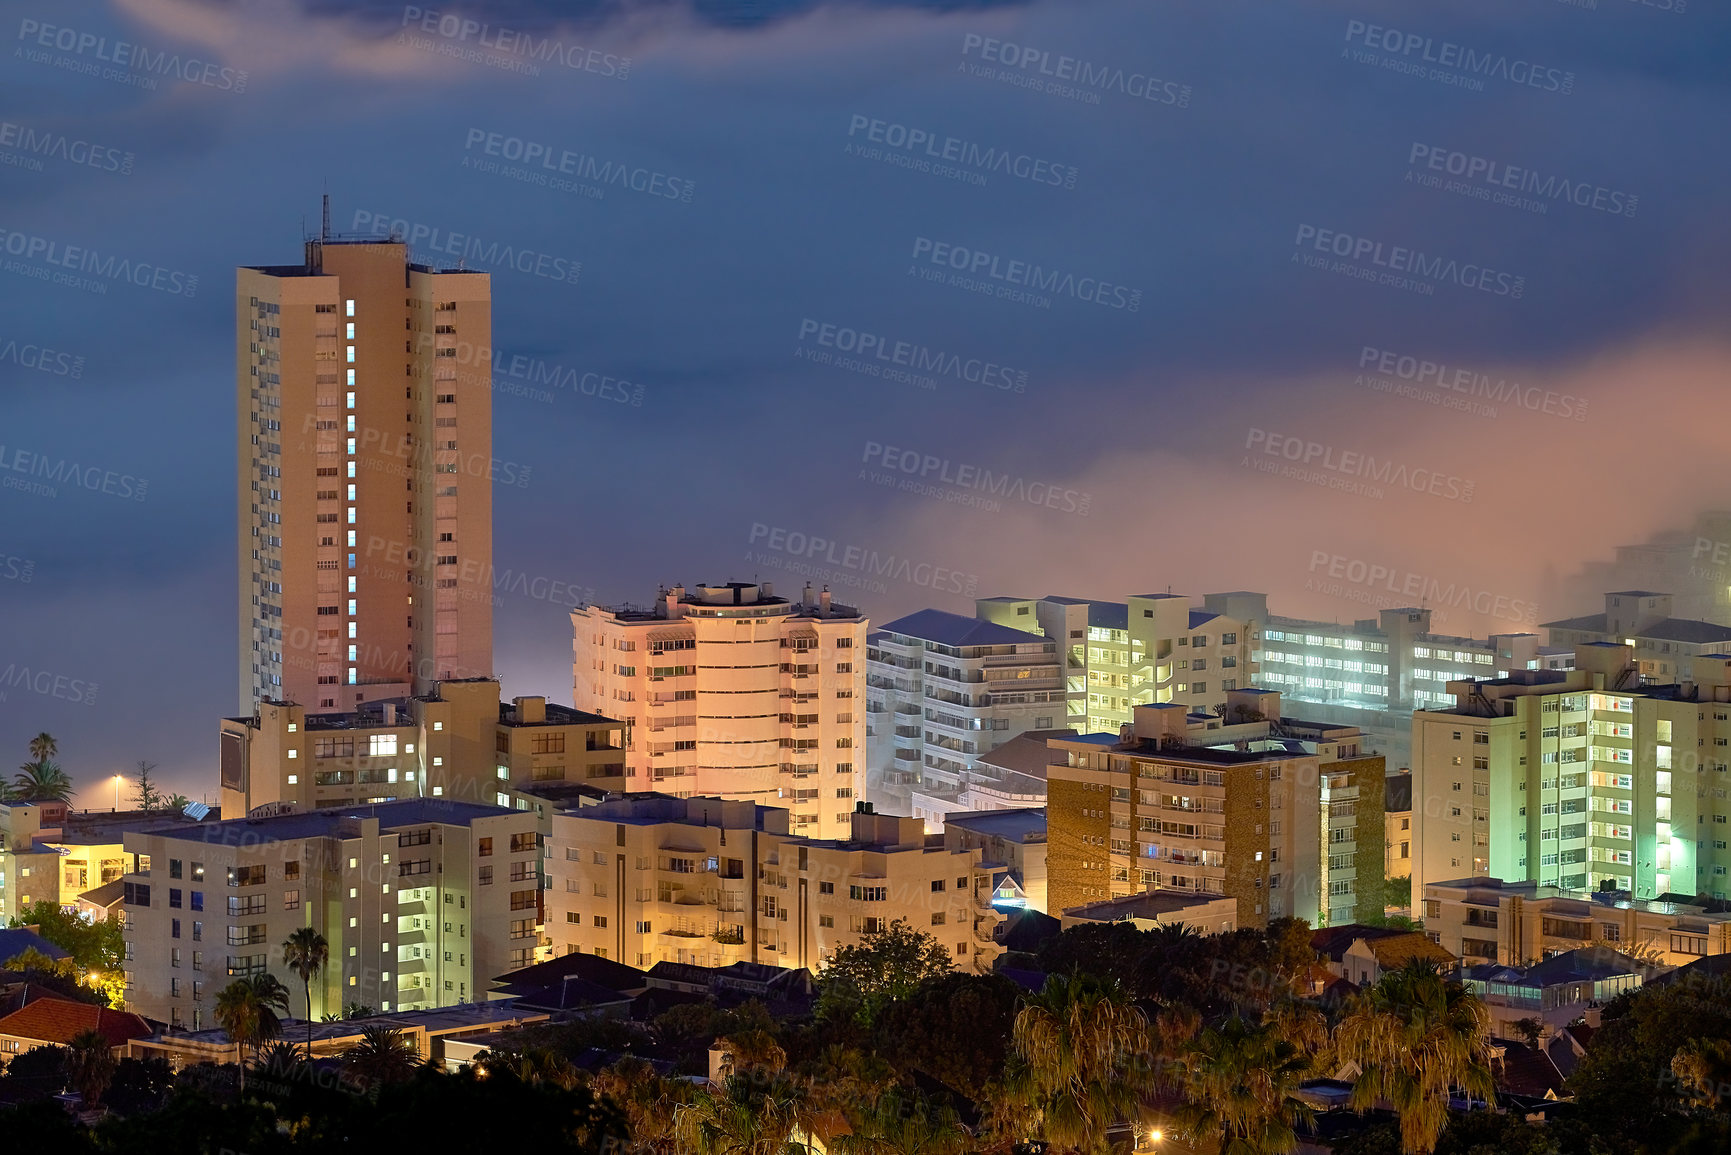 Buy stock photo Aerial view of fancy hotels and apartment buildings lit up brighly in Sea Point, Cape Town, South Africa at night. An overcast and cloudy evening at a tourist resort during winter in the Western Cape